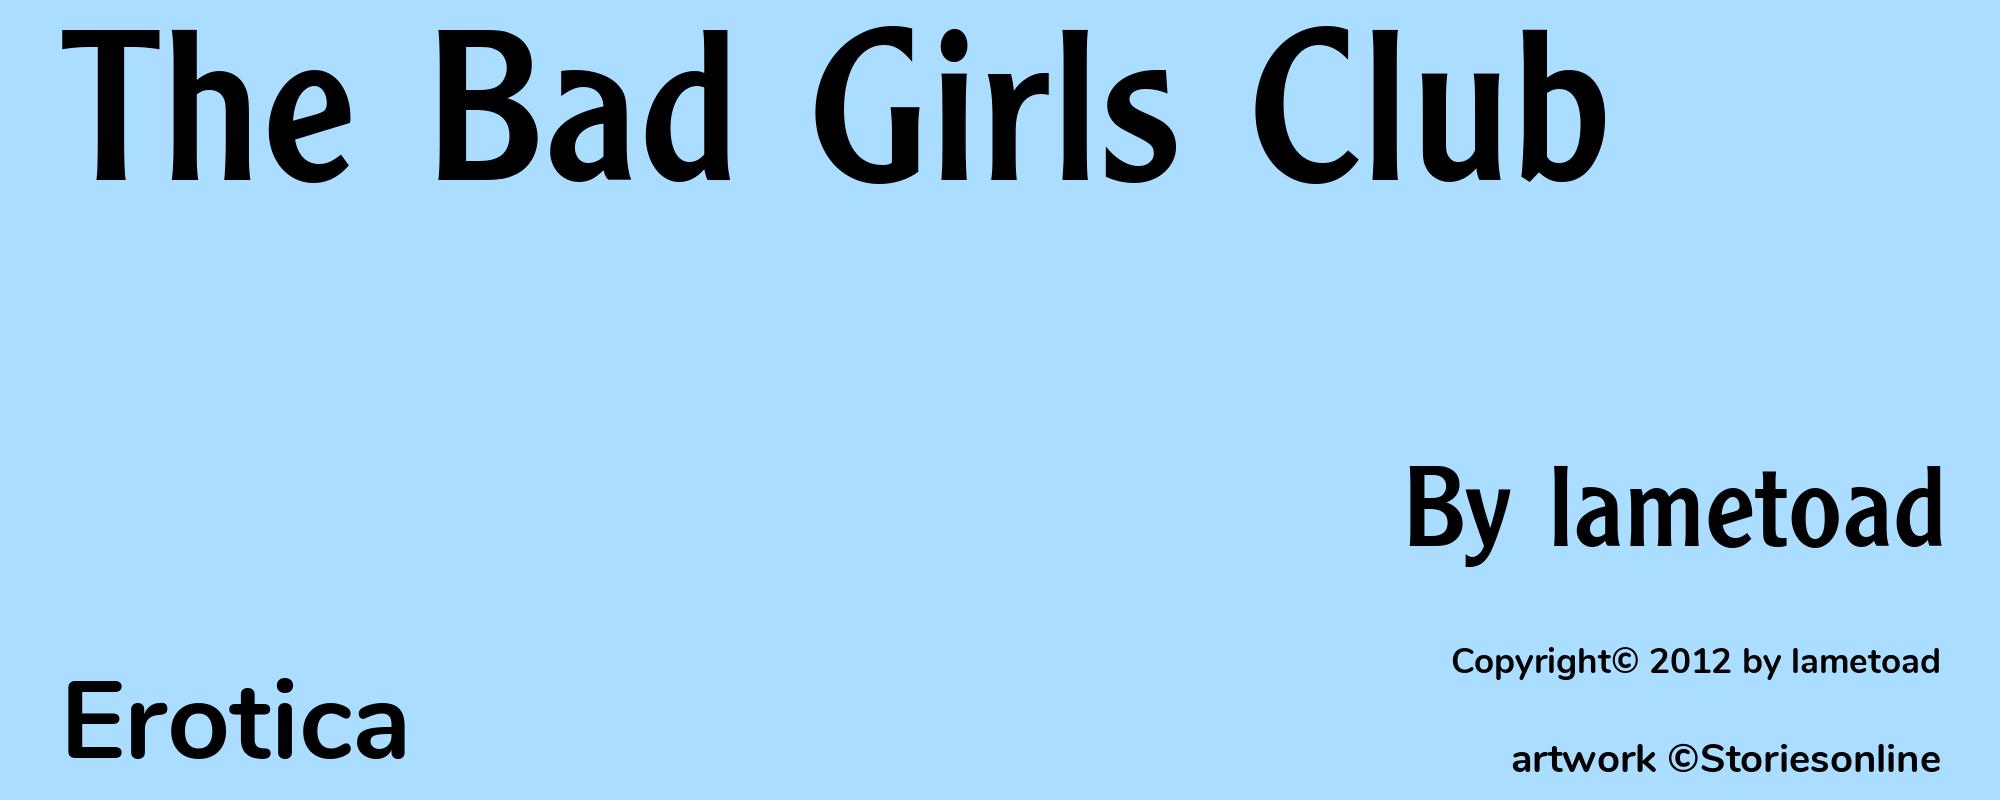 The Bad Girls Club - Cover